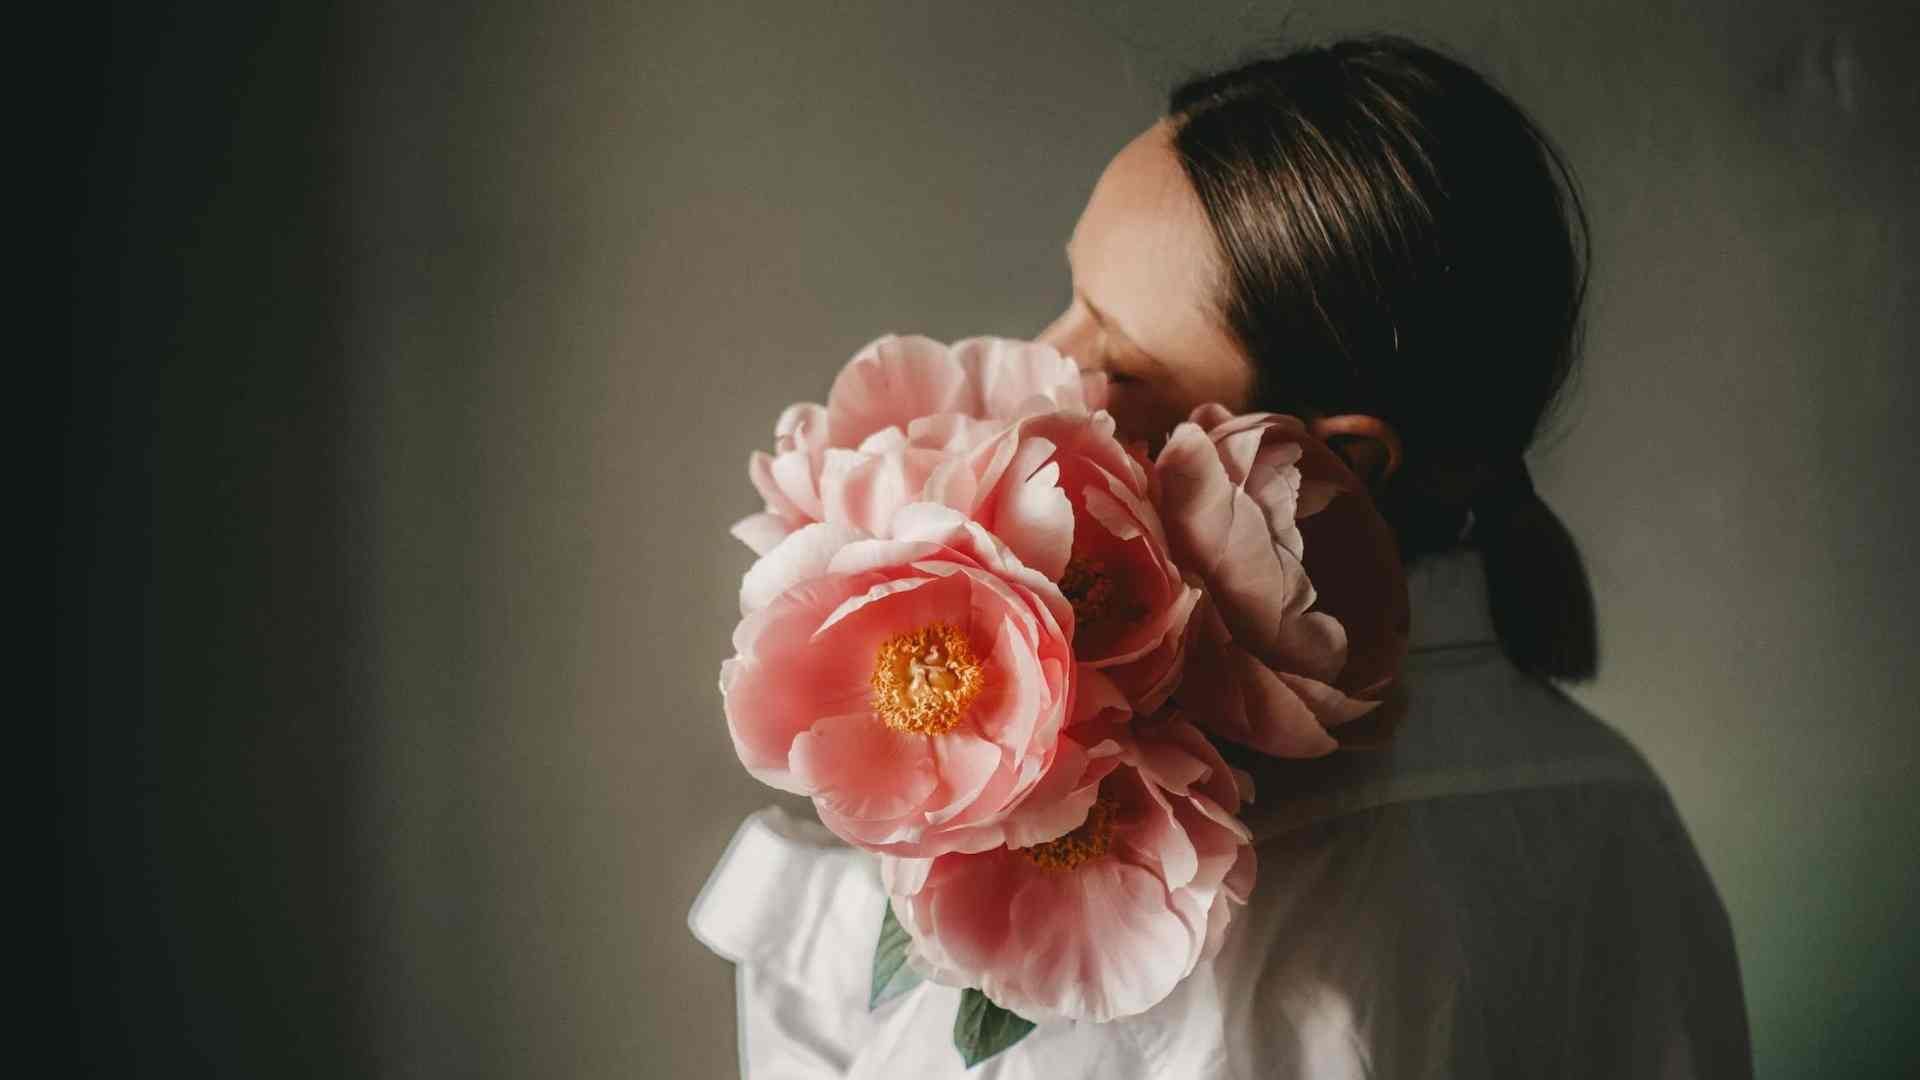 A woman has her back to the camera, holding a large pink flower to her face that covers her profile picture.